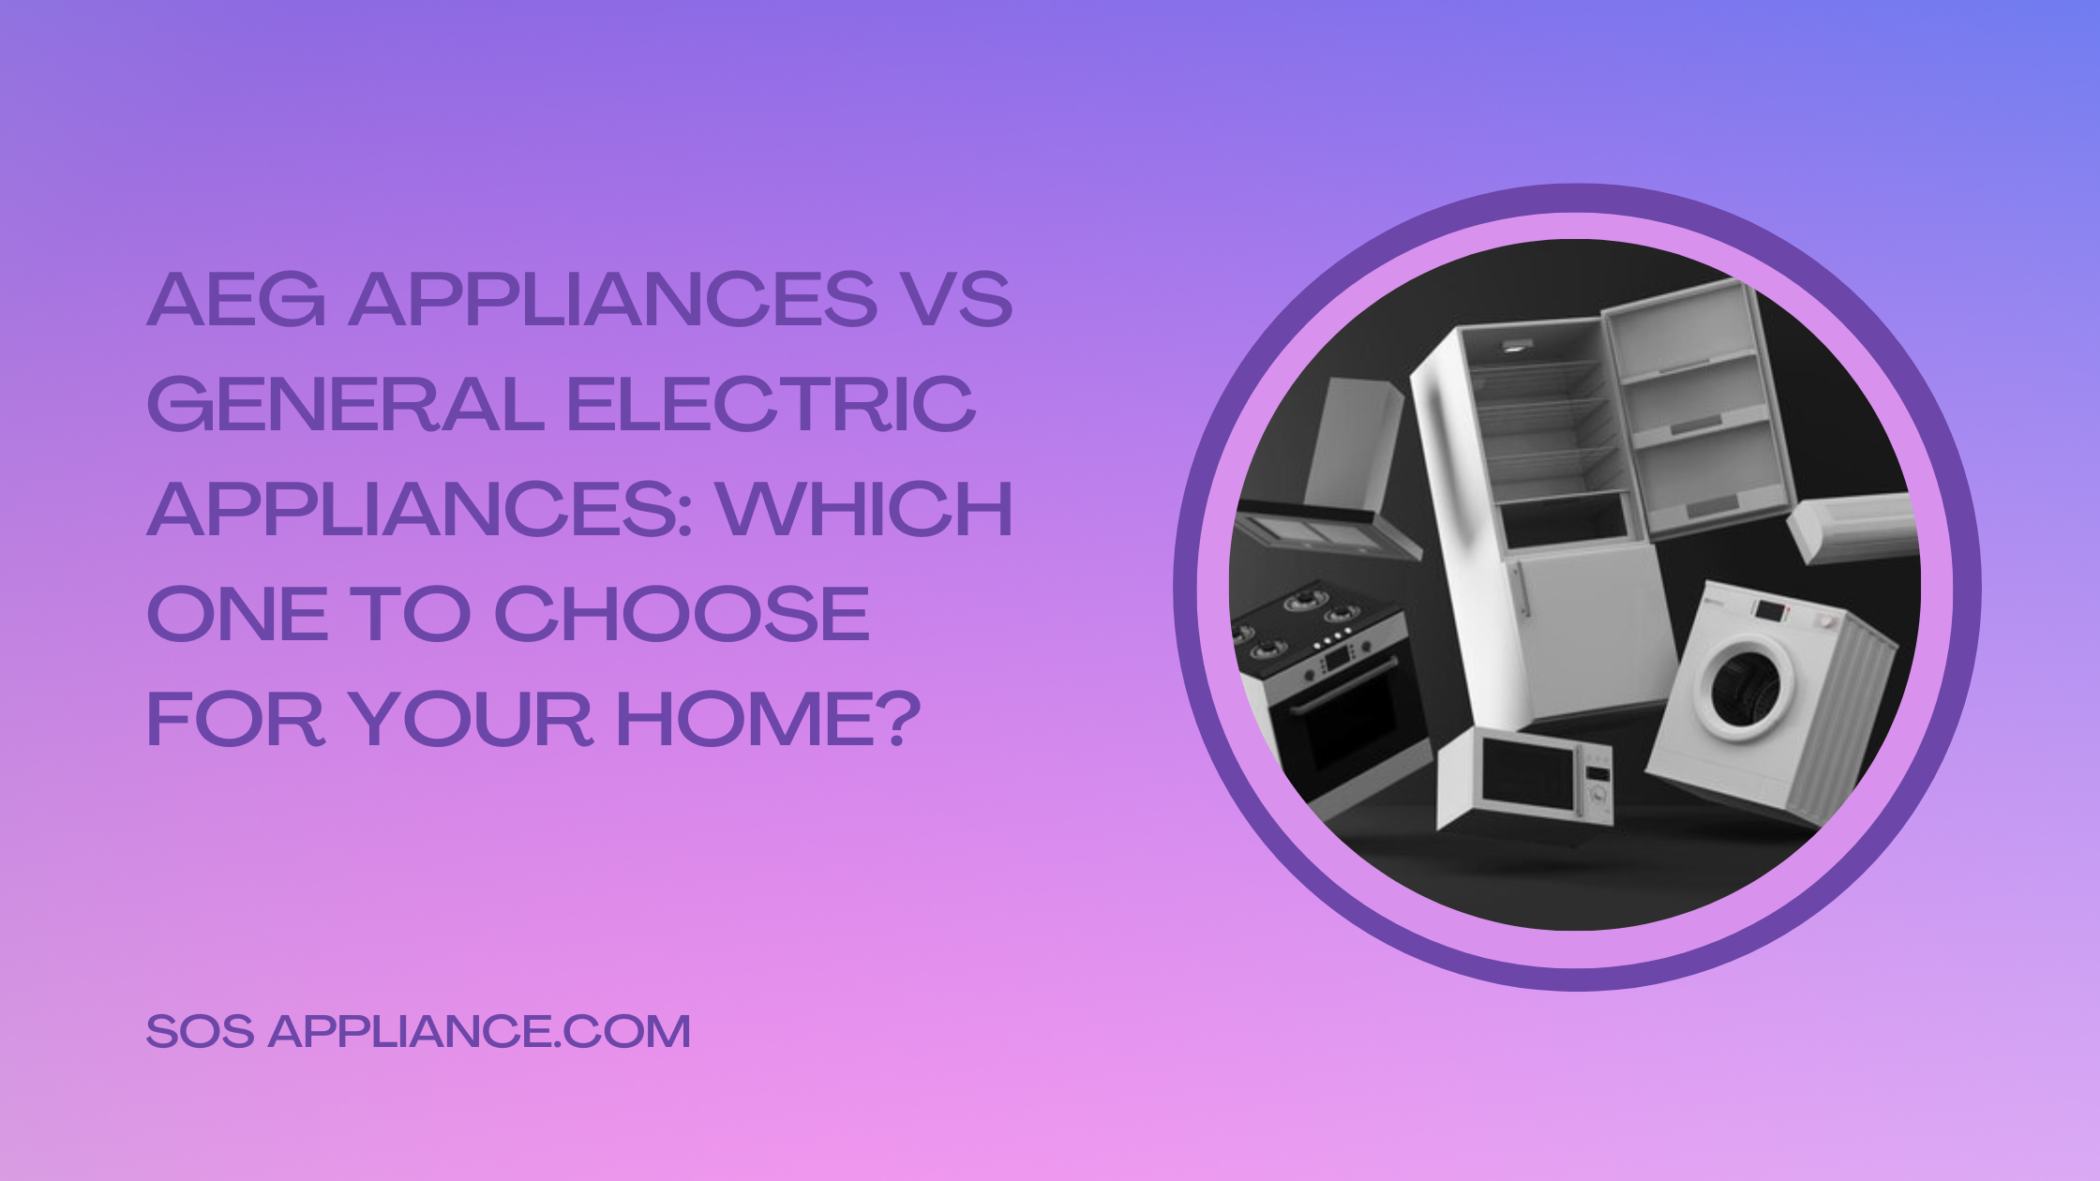 AEG Appliances vs General Electric Appliances Which One to Choose for Your Home